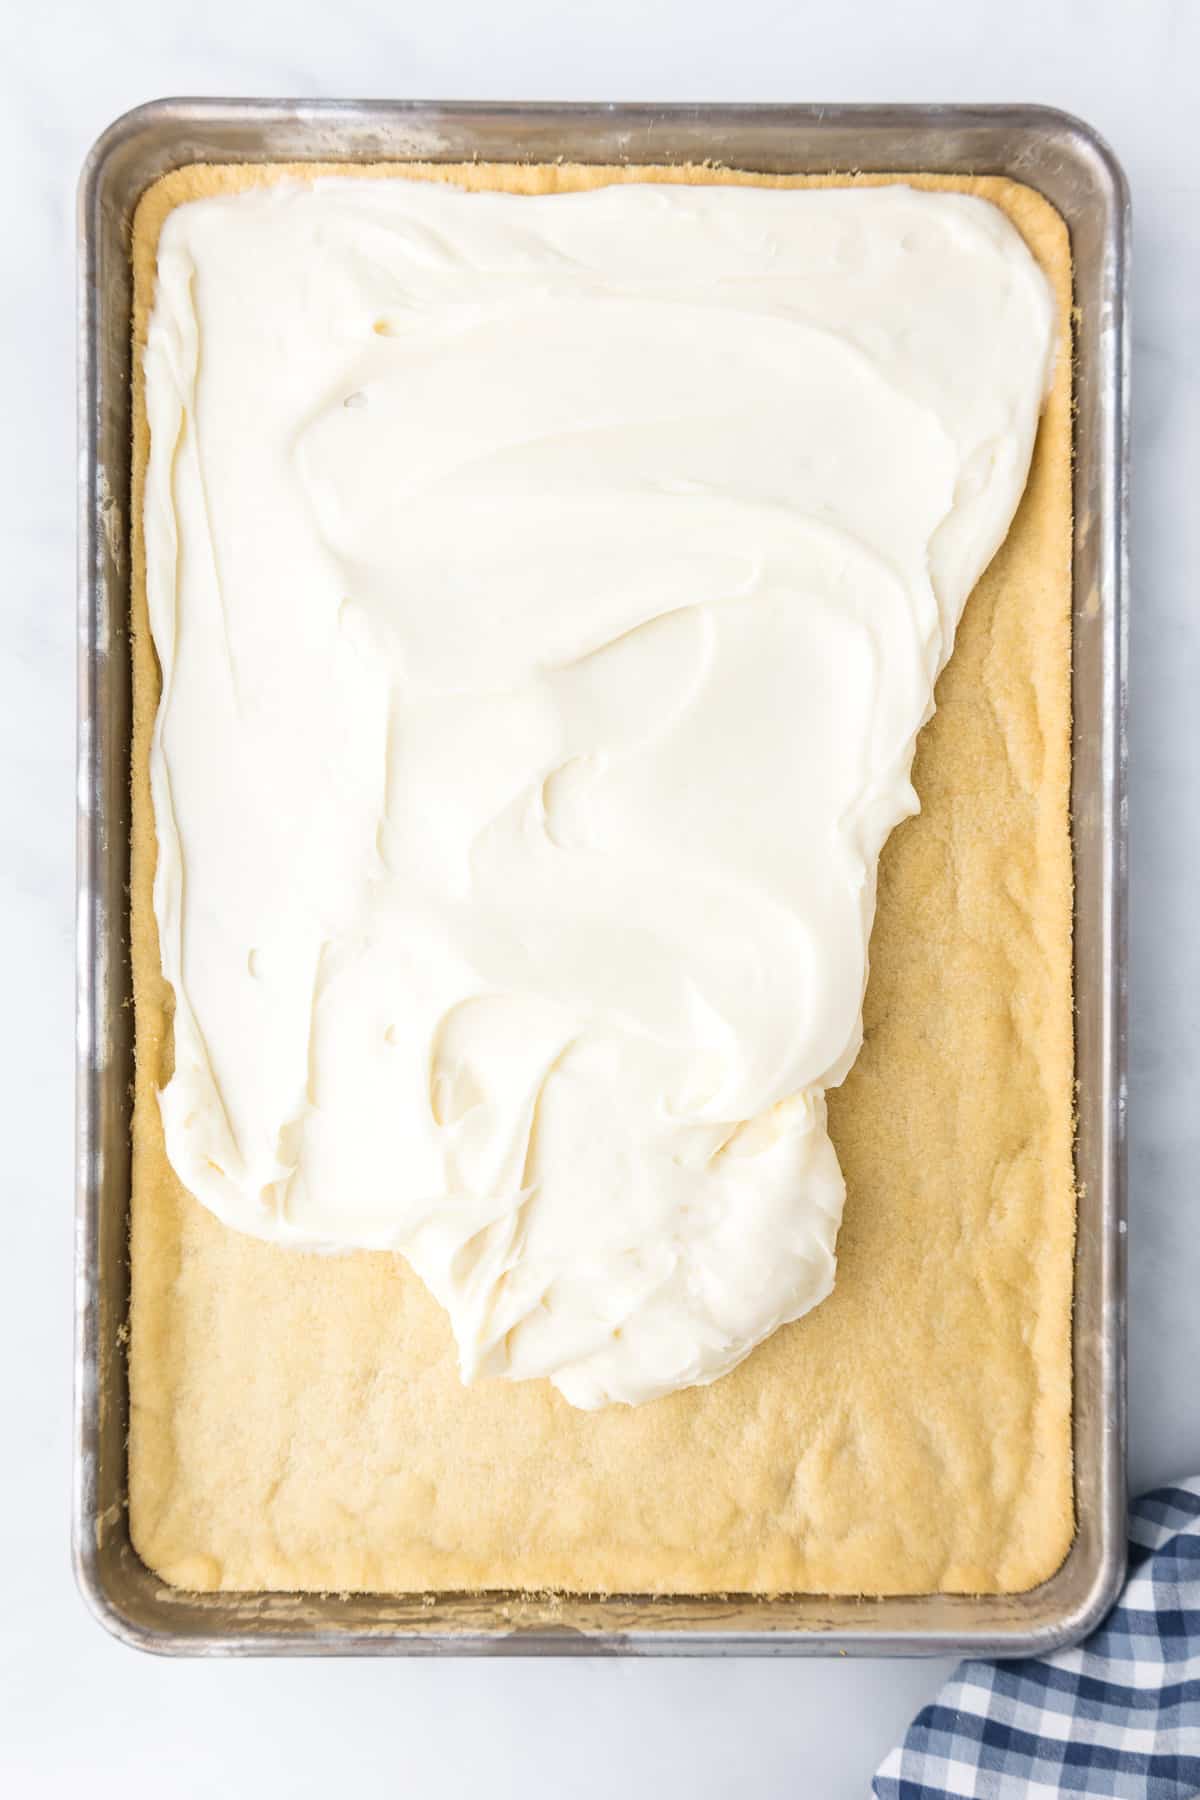 Cream cheese frosting being spread over baked sugar cookie on a sheet pan.